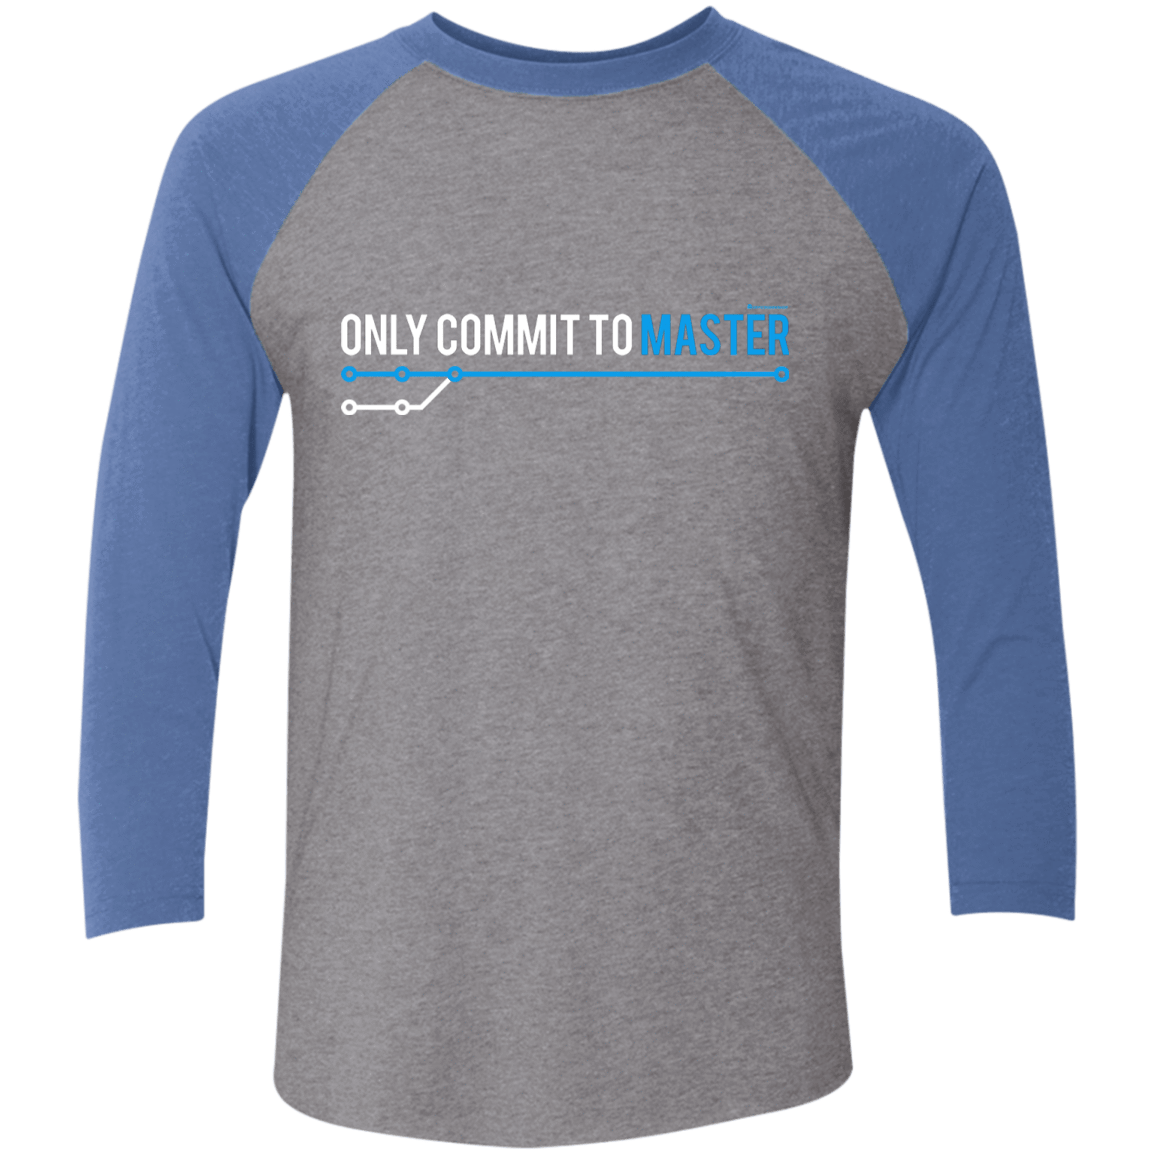 T-Shirts Premium Heather/Vintage Royal / X-Small Only Commit To Master Men's Triblend 3/4 Sleeve